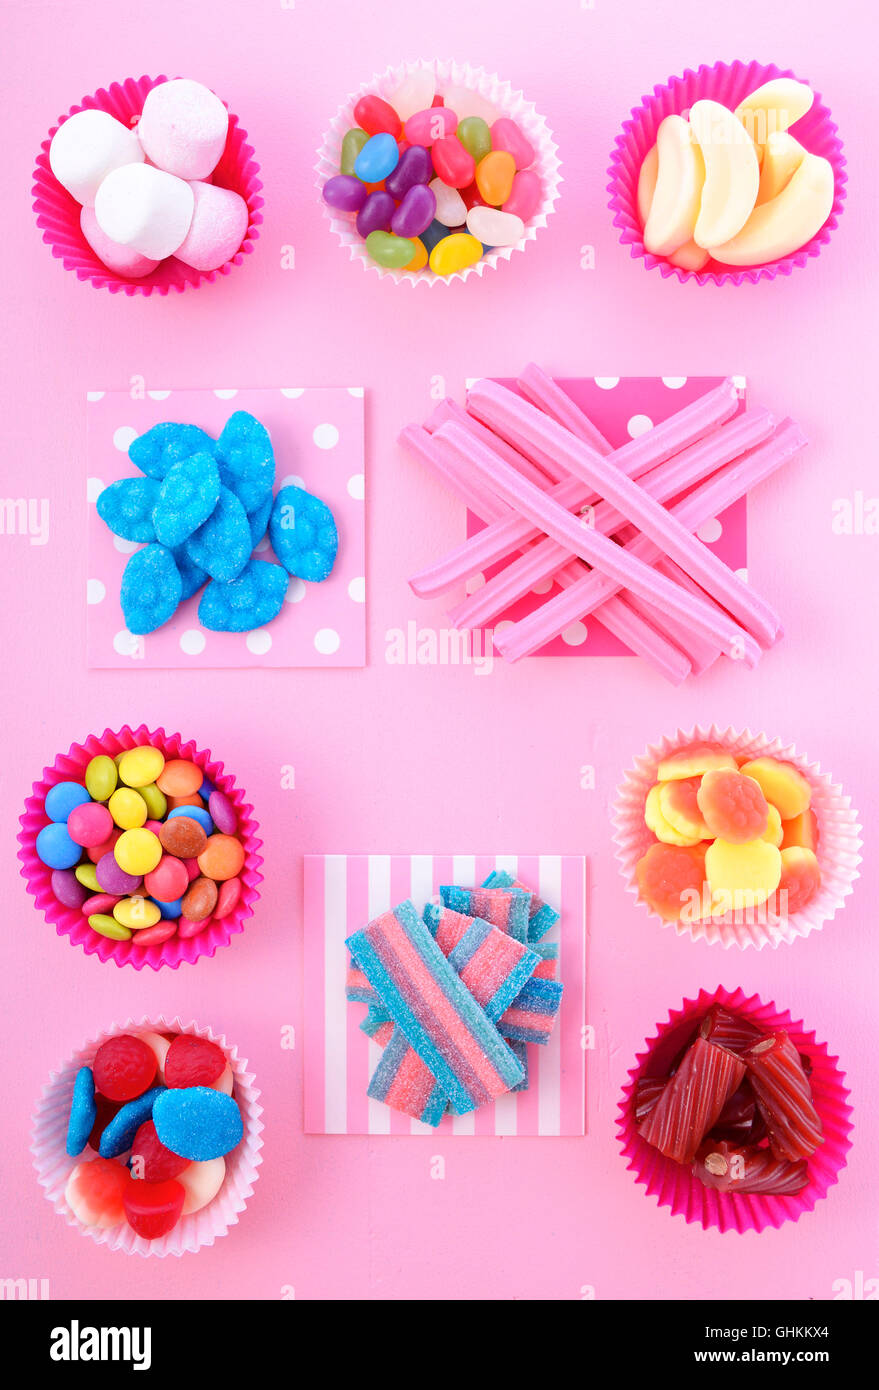 Bright colorful candy background on pink wood table for Halloween trick of treat or childrens birthday party favors. Stock Photo